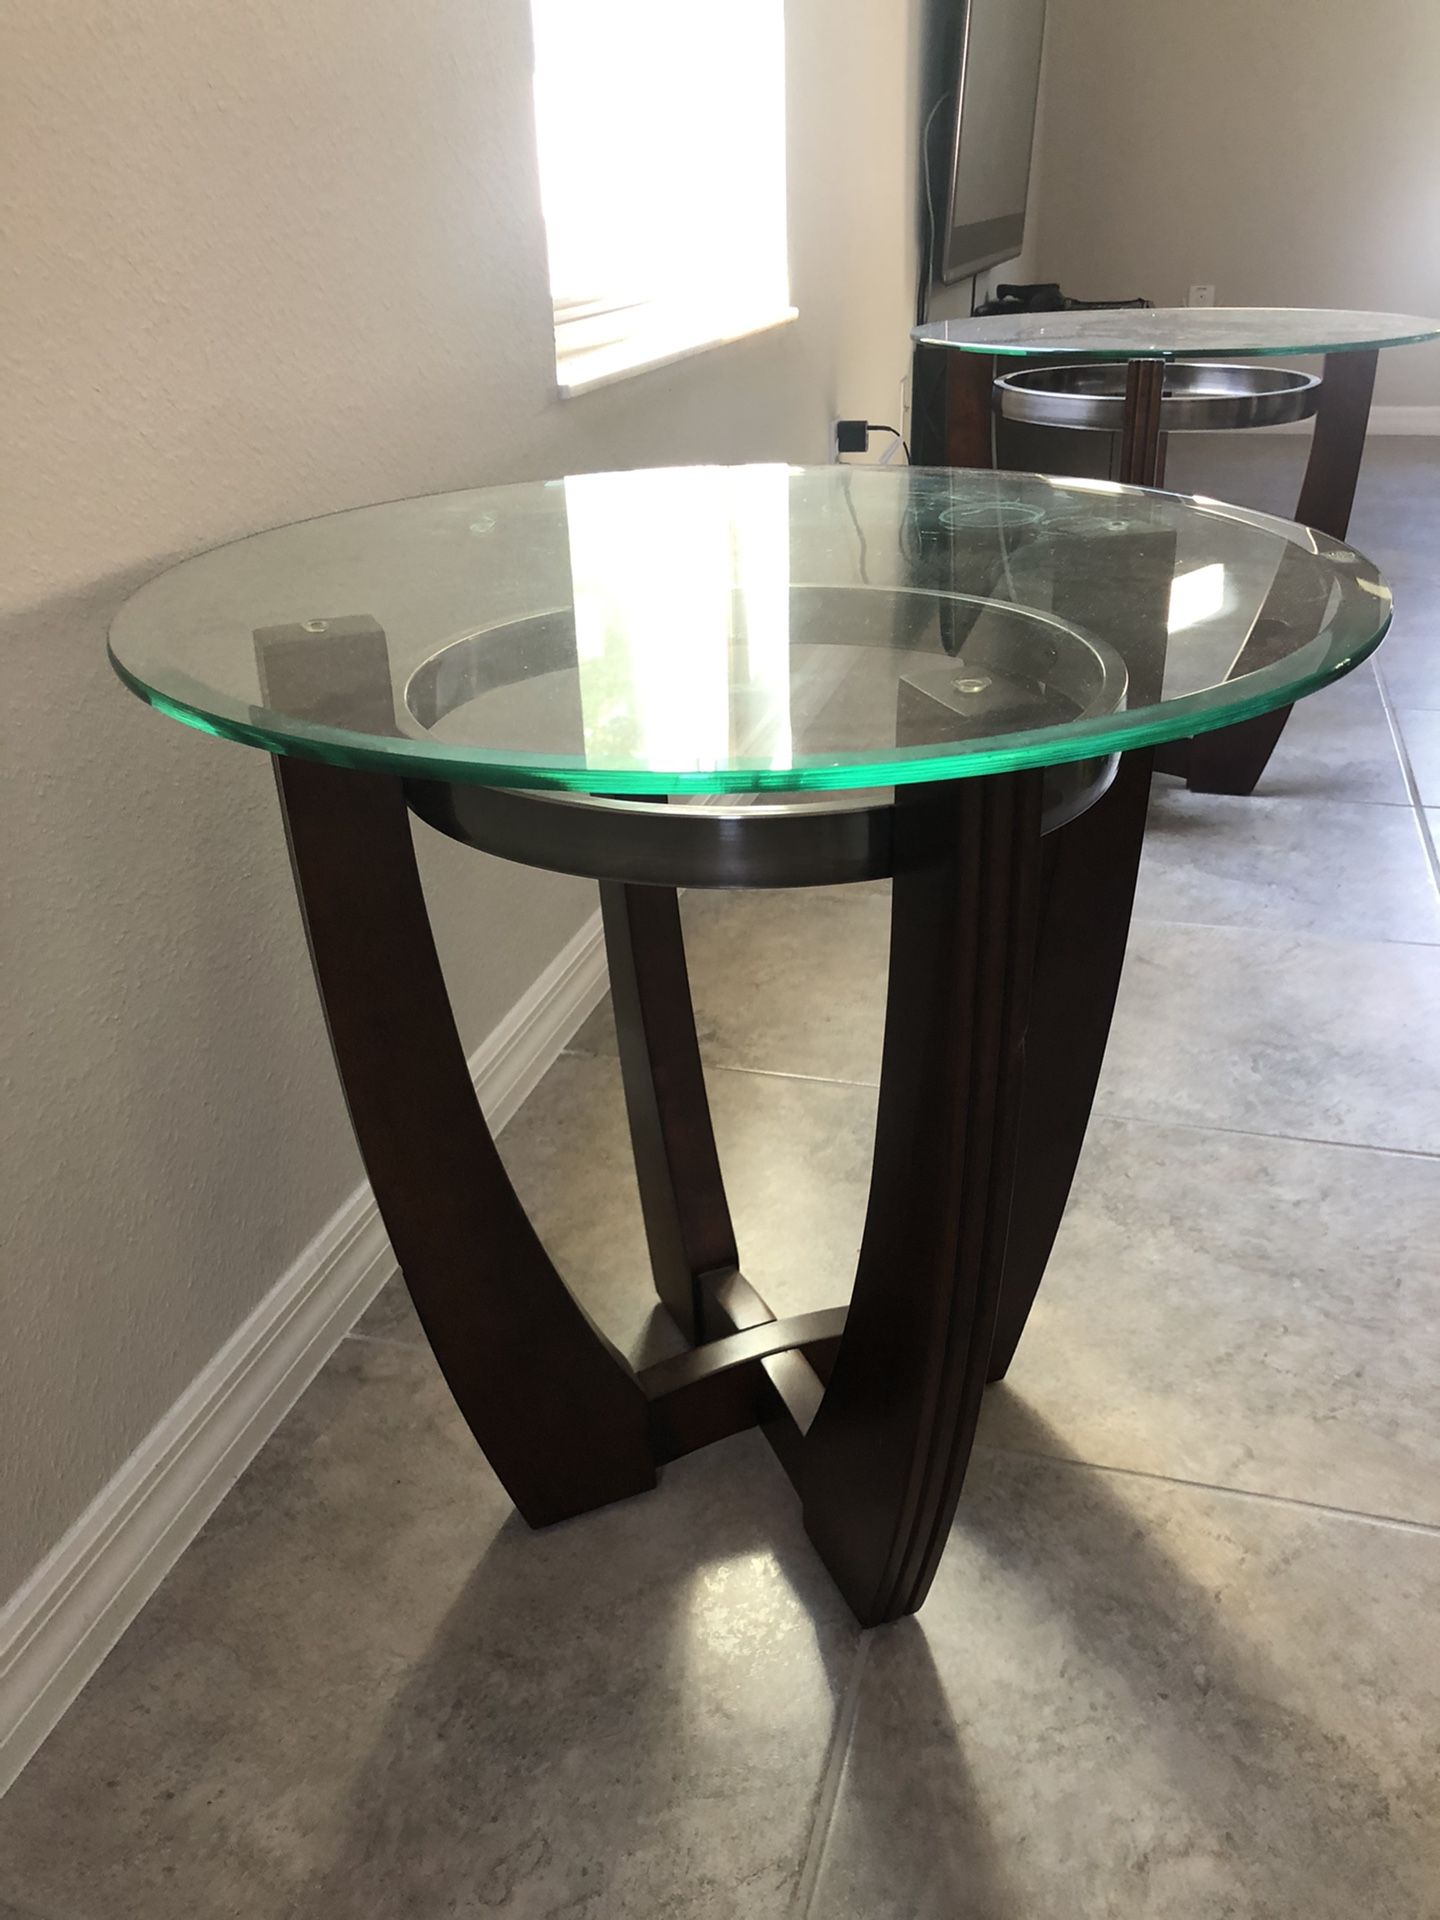 Set of 3 coffee tables.